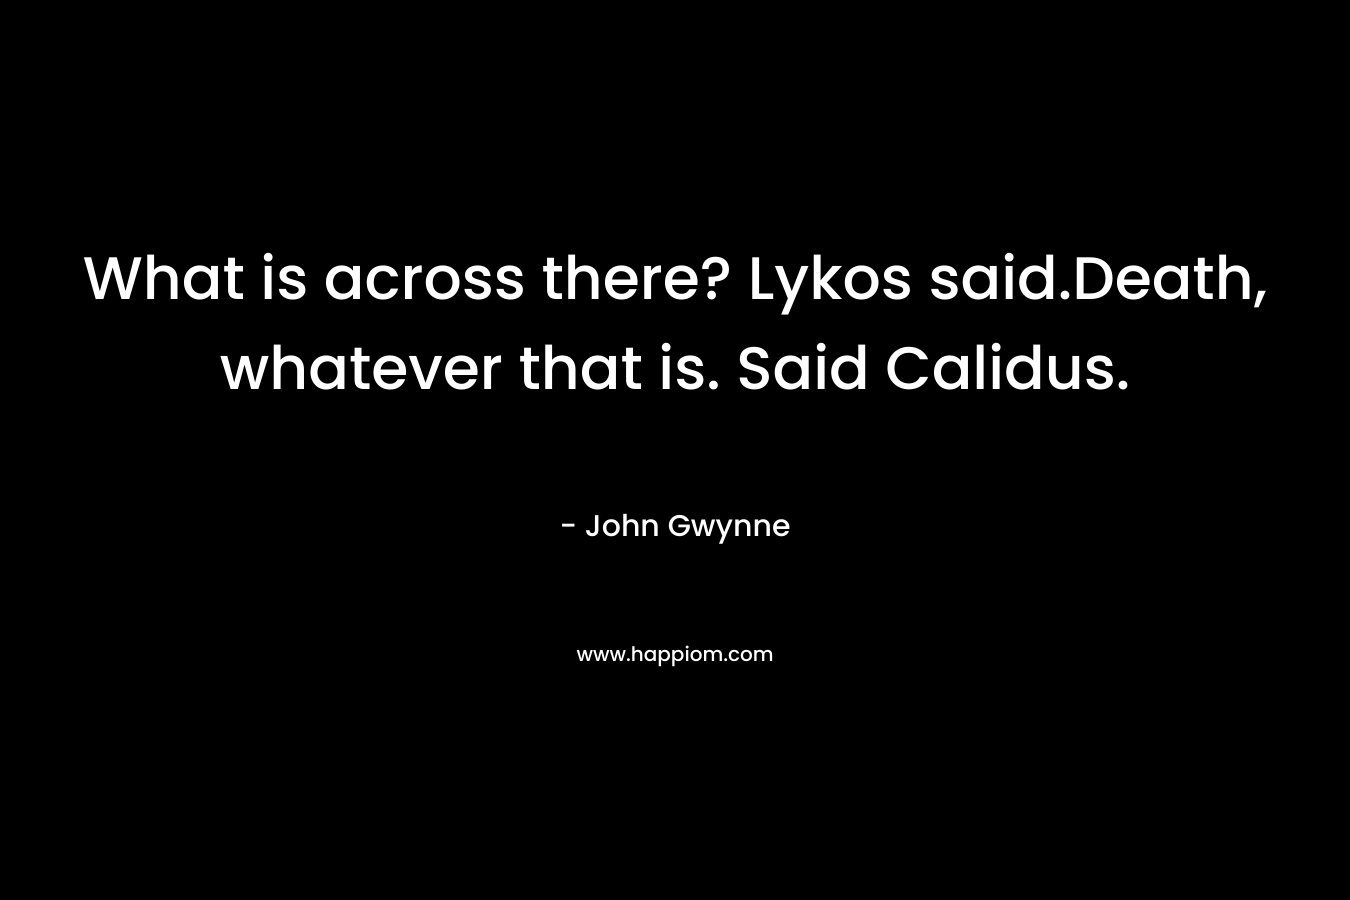 What is across there? Lykos said.Death, whatever that is. Said Calidus. – John Gwynne